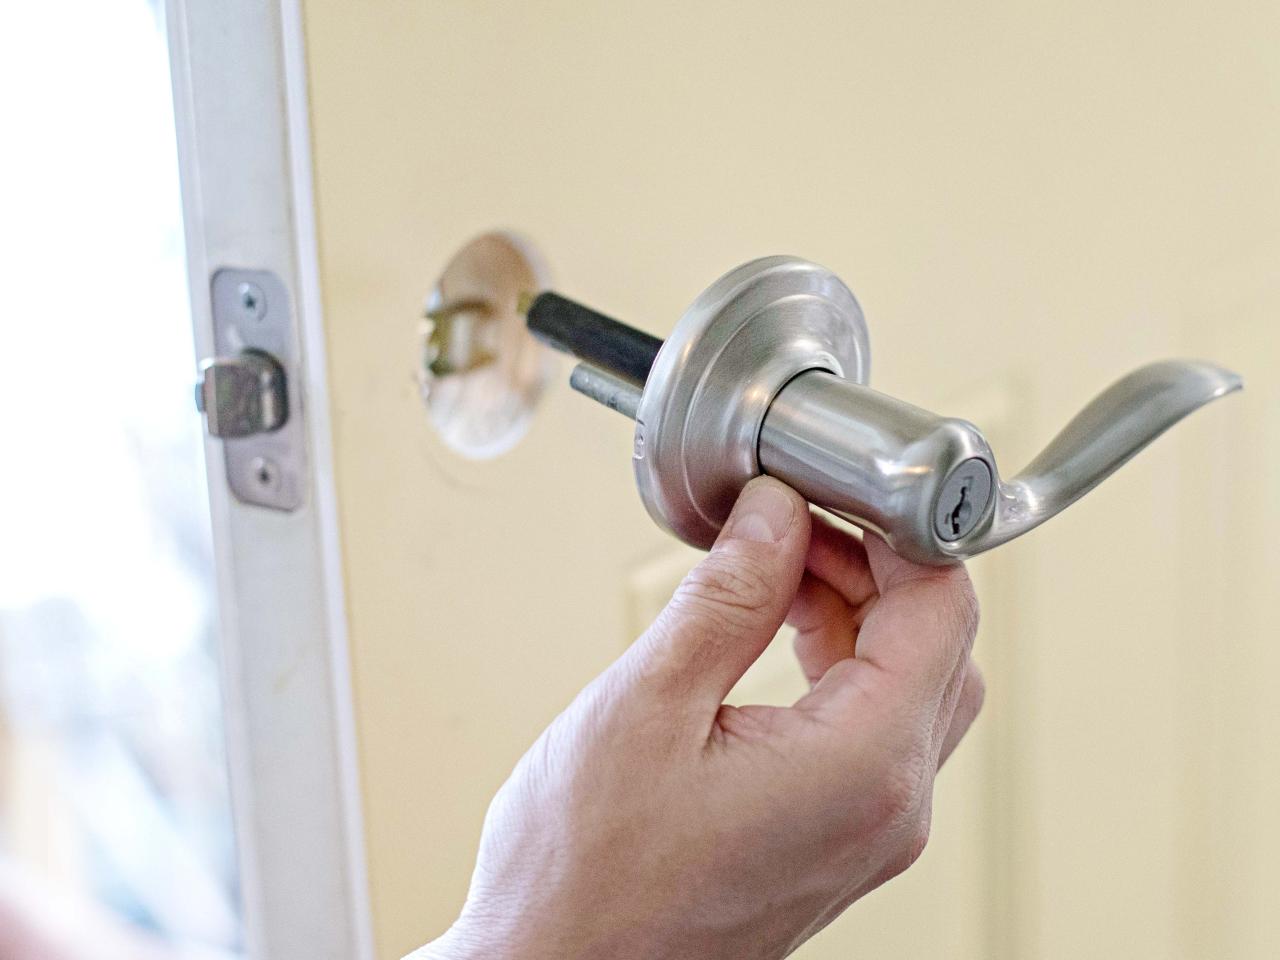 How to Replace a Bedroom And Bathroom Door Knob?